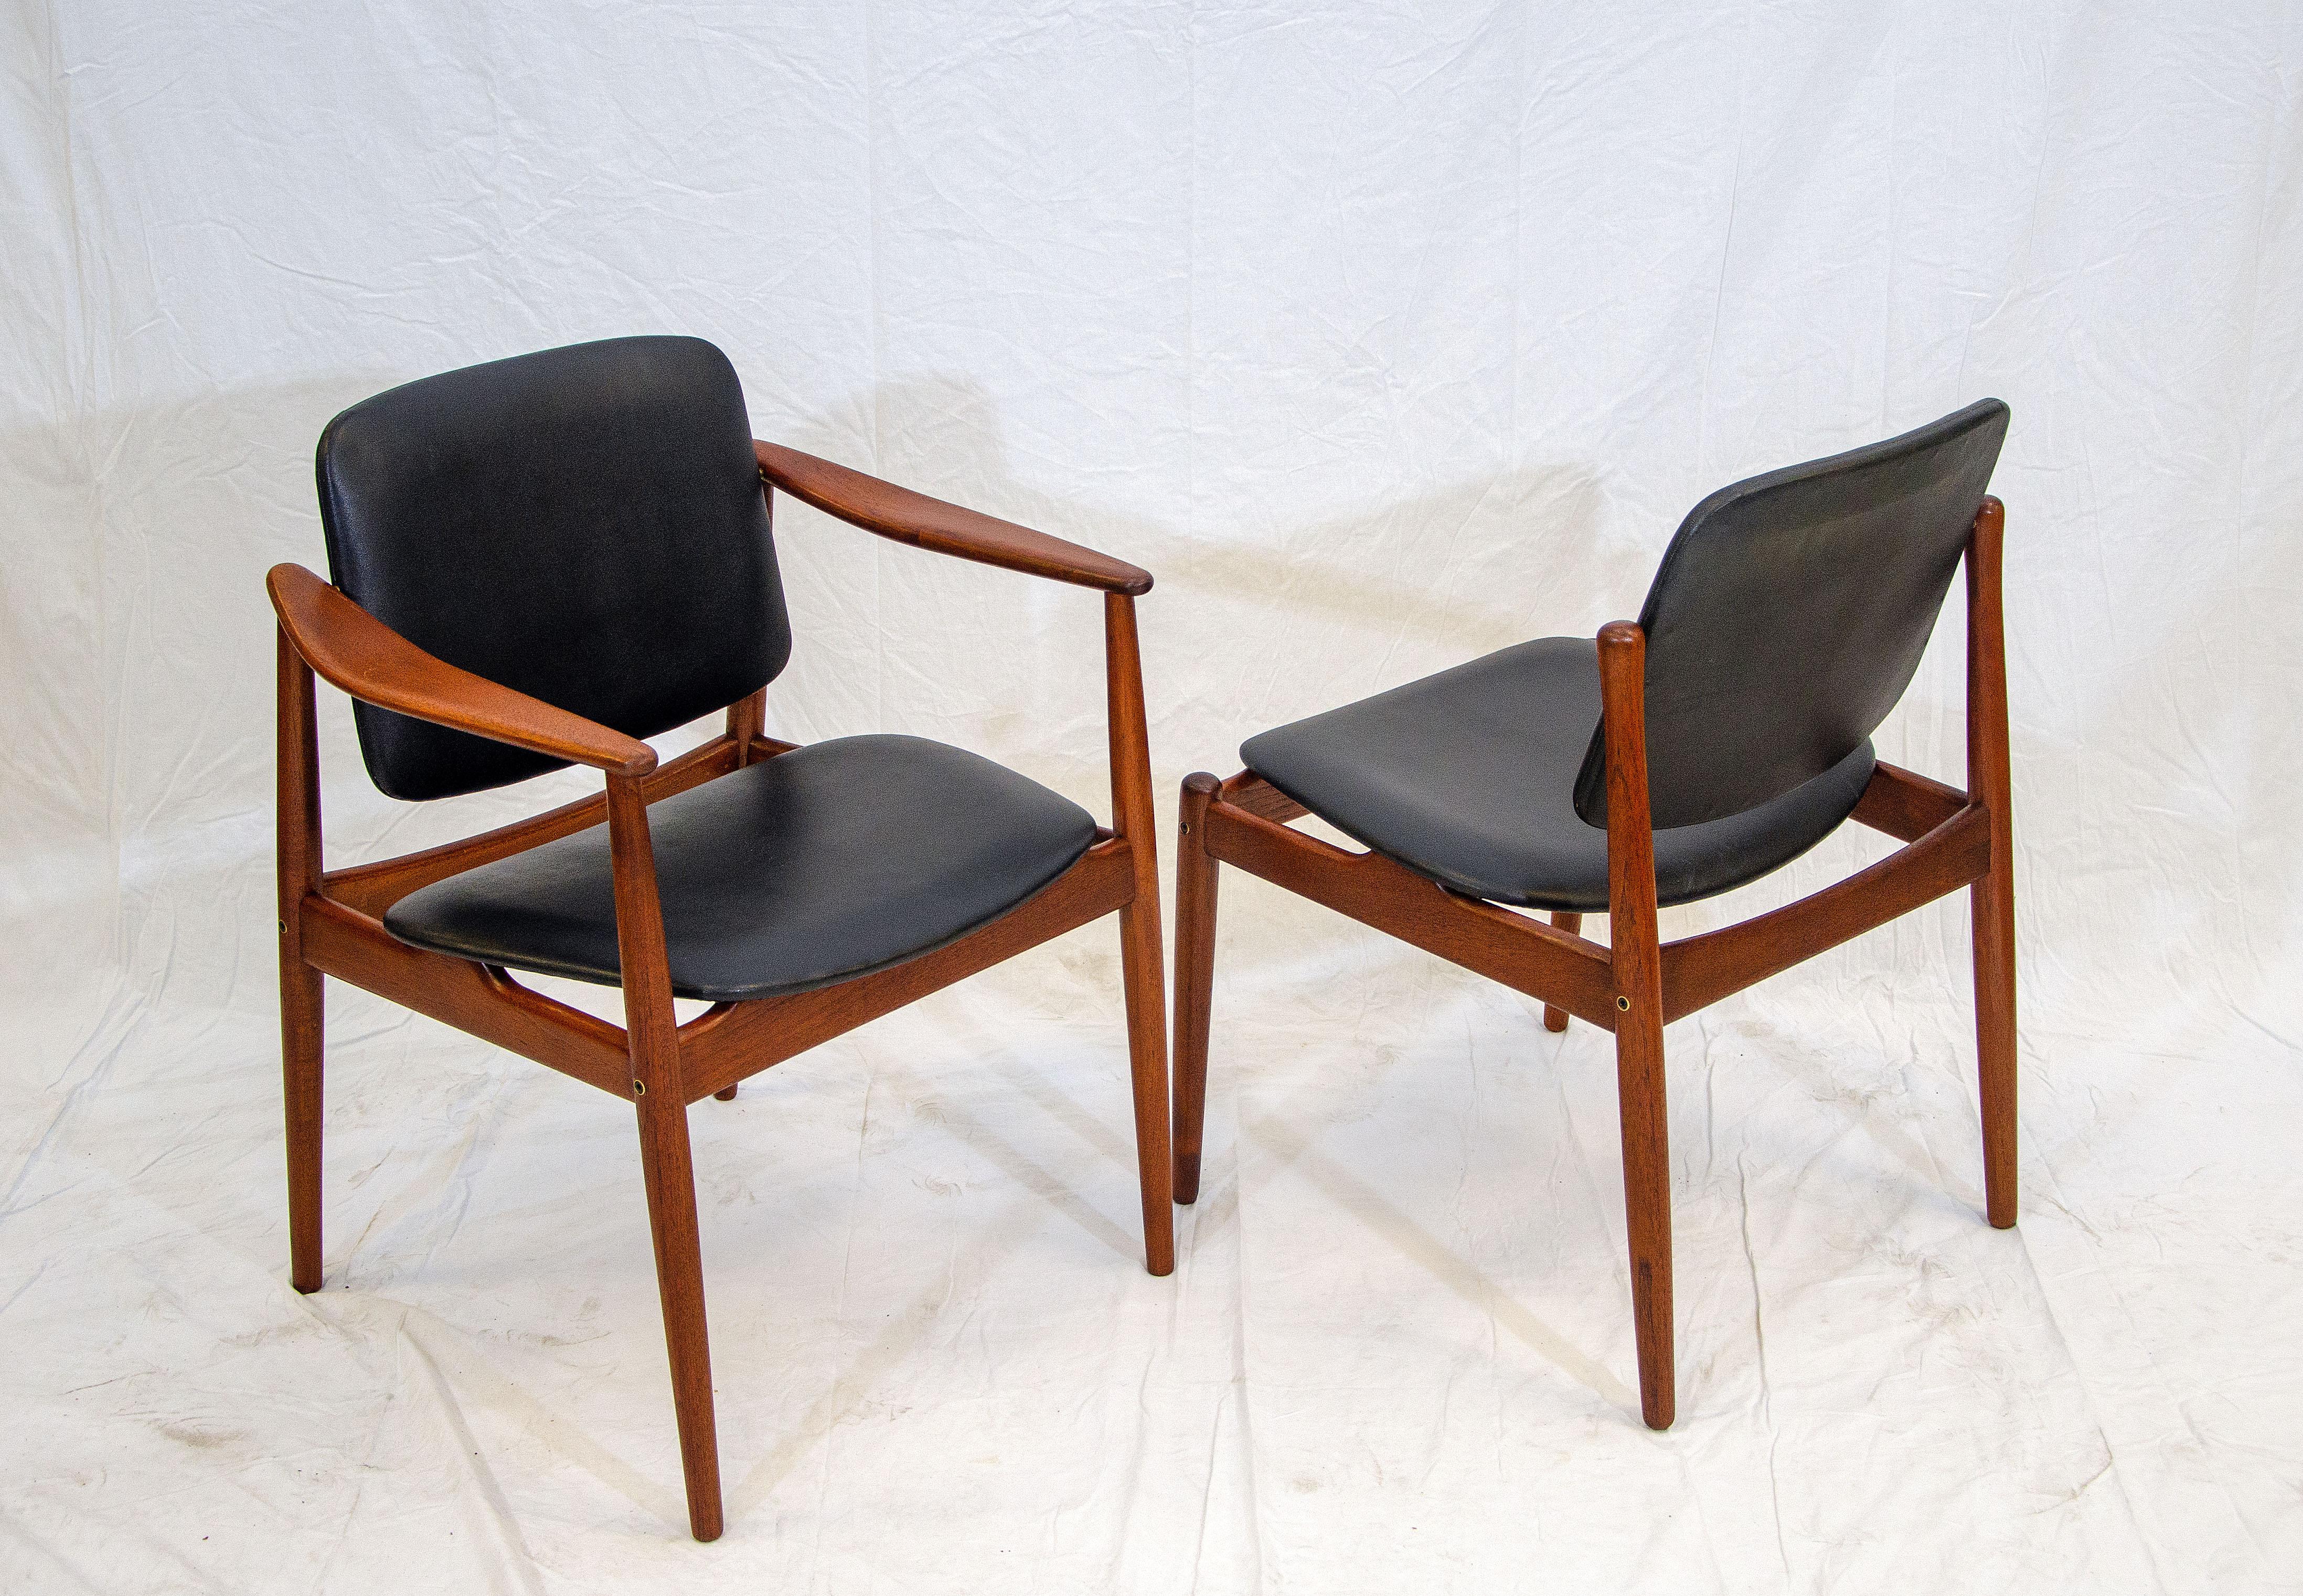 Faux Leather Set of Six Danish Teak Dining Chairs by Arne Vodder for Bovirke, BO92